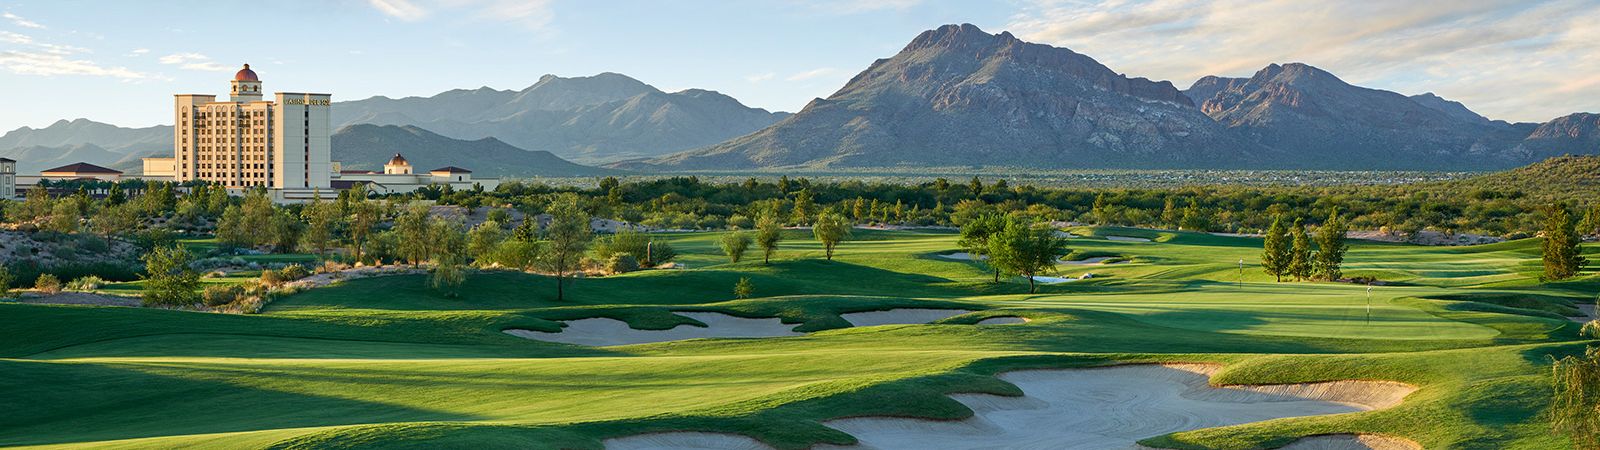 Golf Hotel Packages in Tucson Arizona 